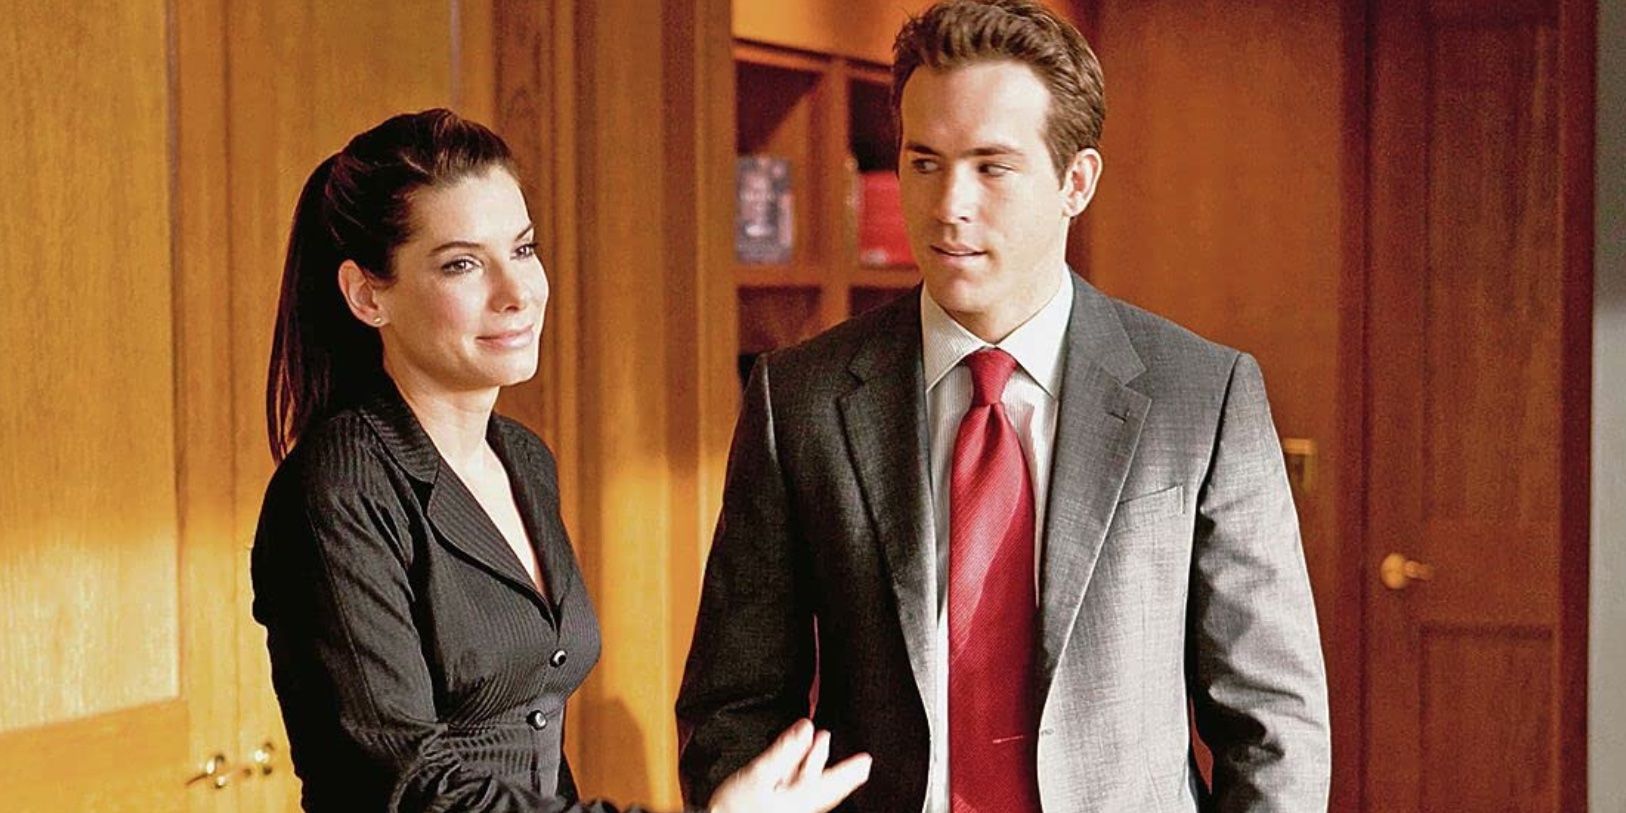 Sandra Bullock and Ryan Reynolds standing in an office in 'The Proposal'